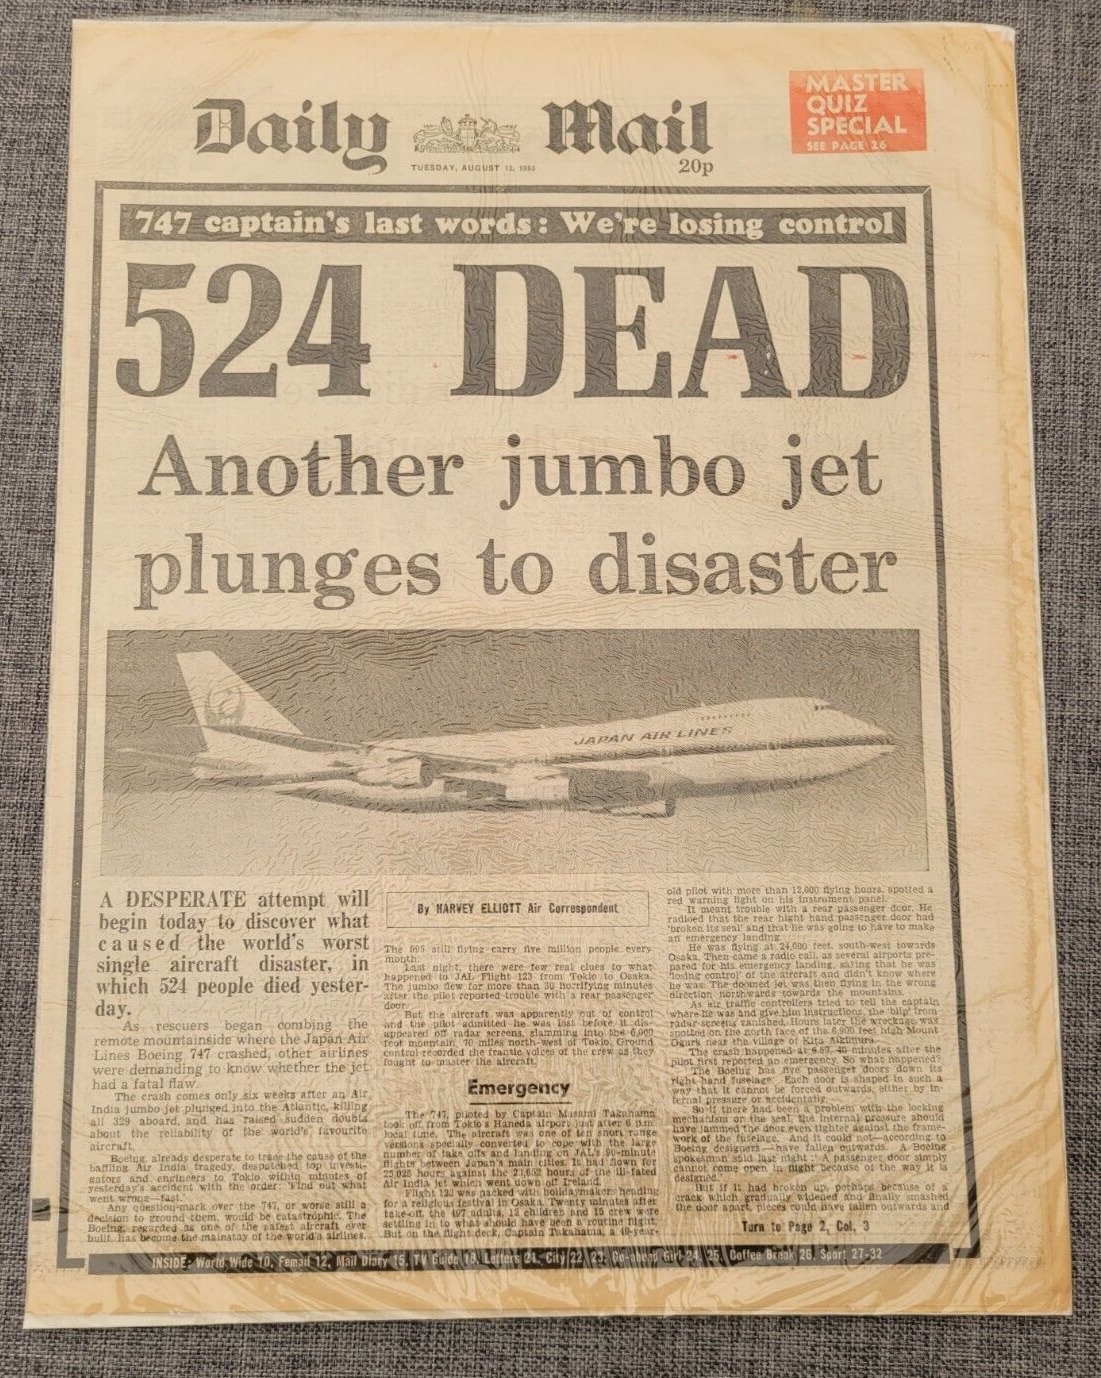 DAILY MAIL BOEING 747 DISASTER JAPAN 524 DEAD 13TH AUG 1985 NEWSPAPER